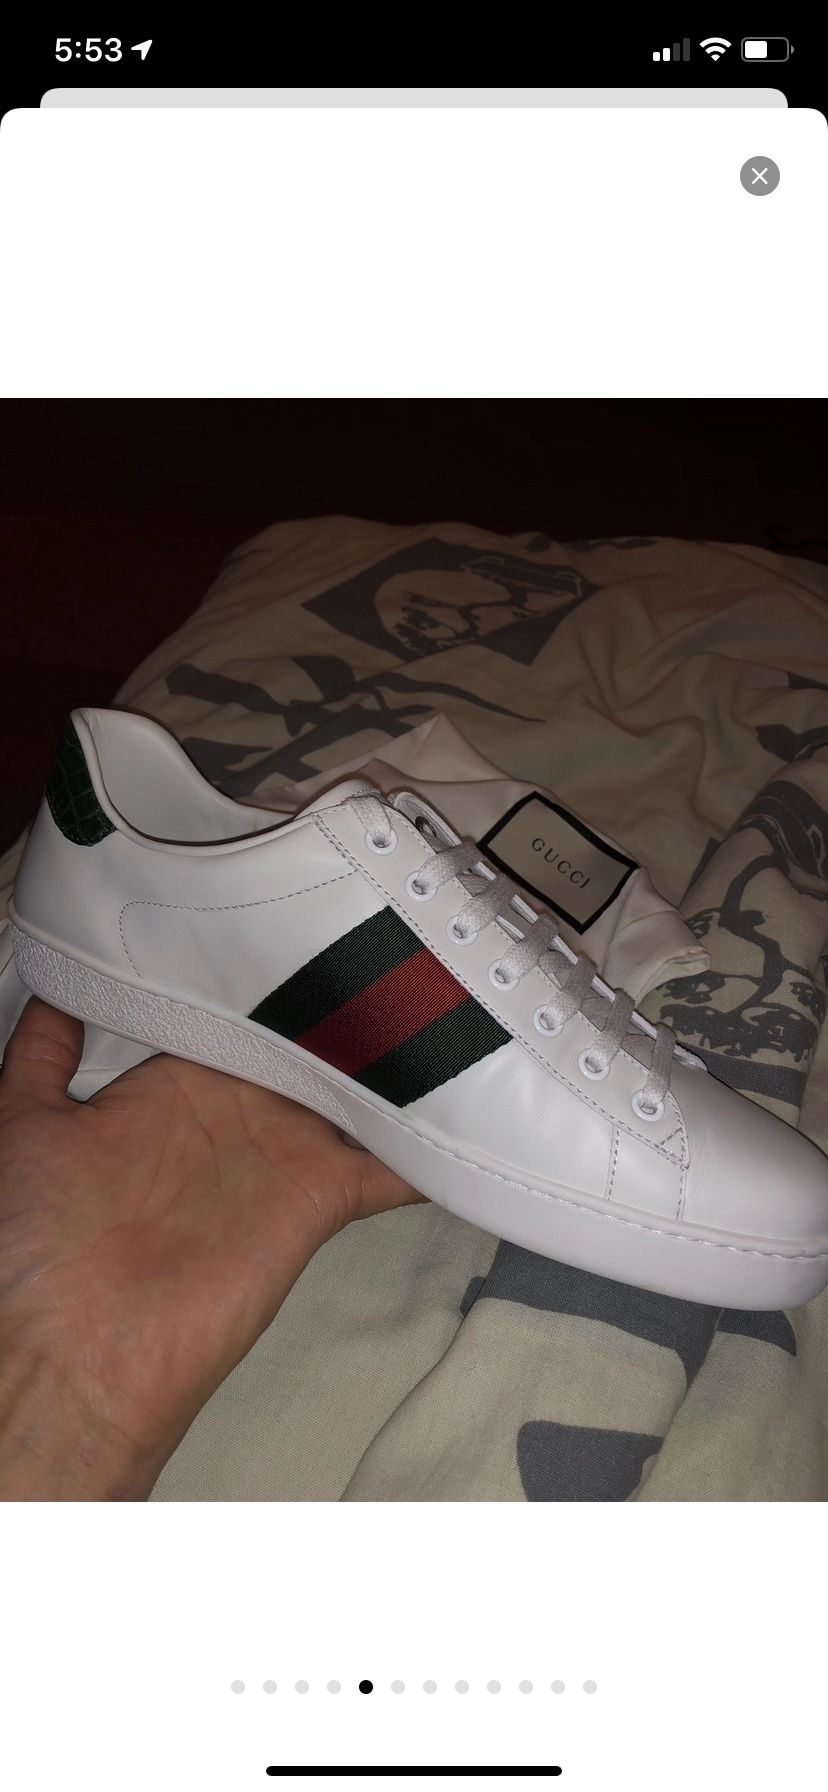 100% AUTHENTIC Genuine Gucci Ace Sneakers Low Top White Leather Size 9 US 42 Men